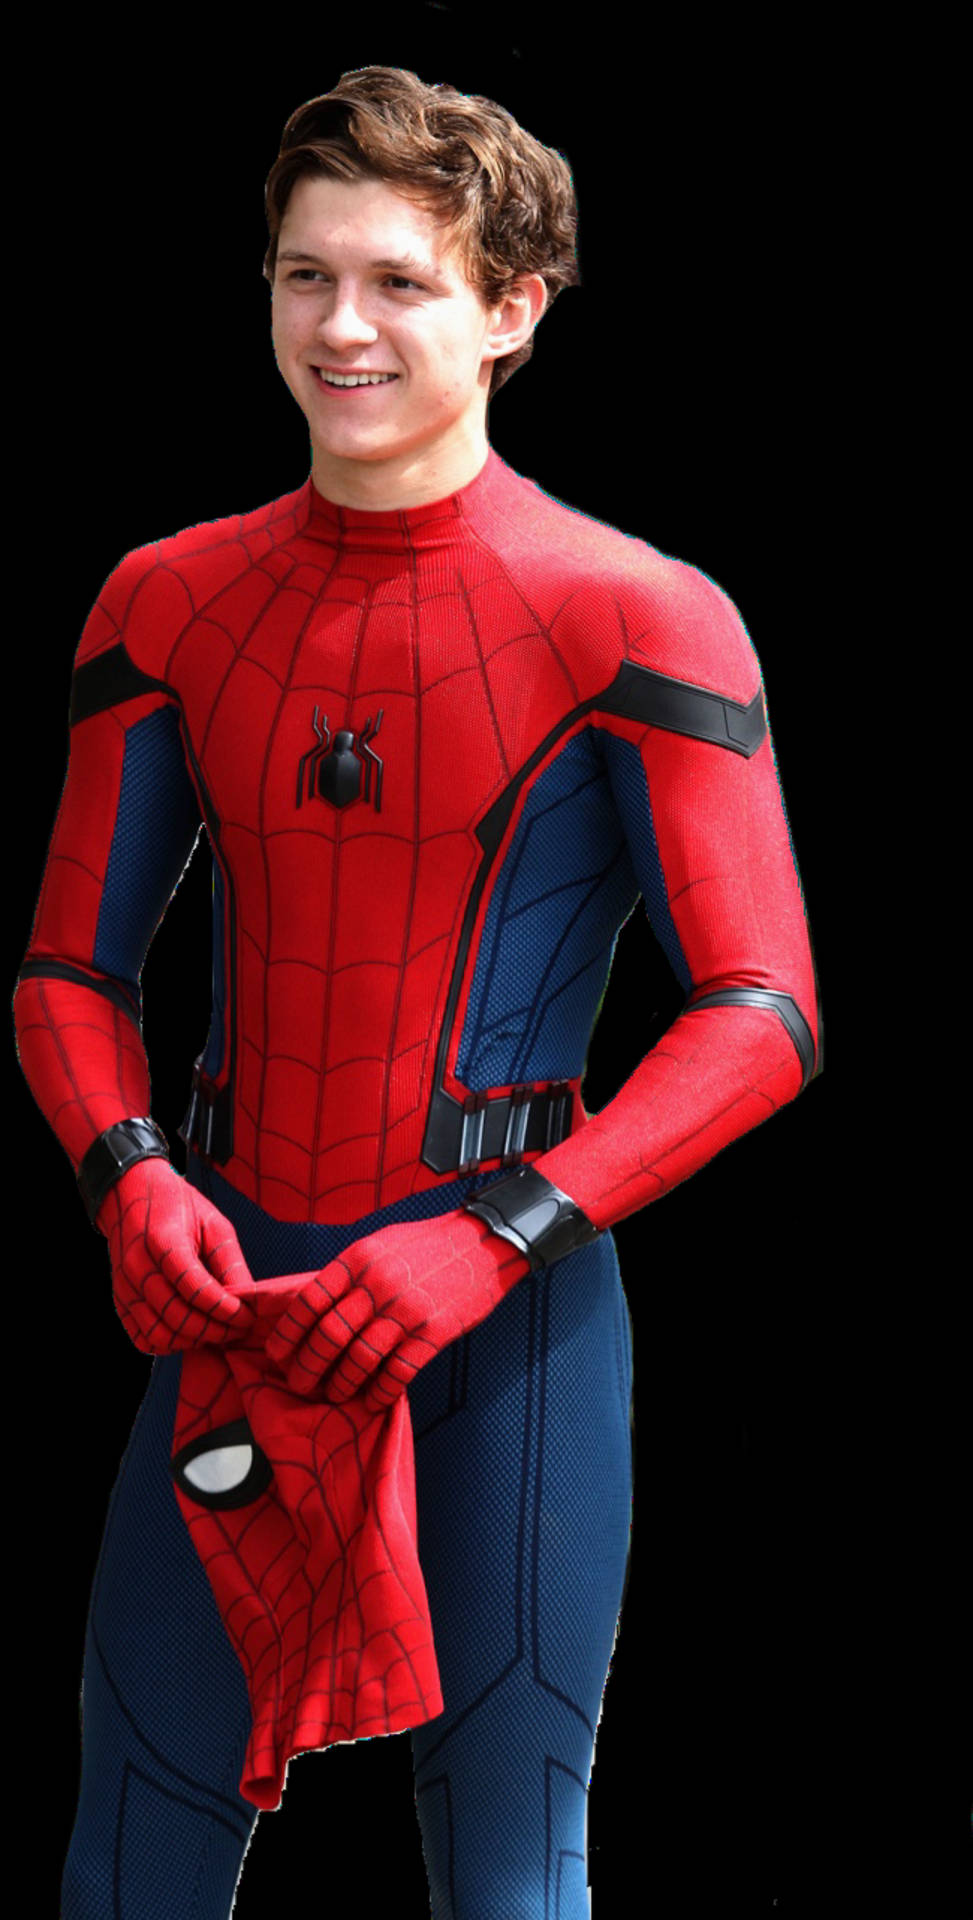 Free Tom Holland Wallpaper Downloads, [100+] Tom Holland Wallpapers for  FREE 